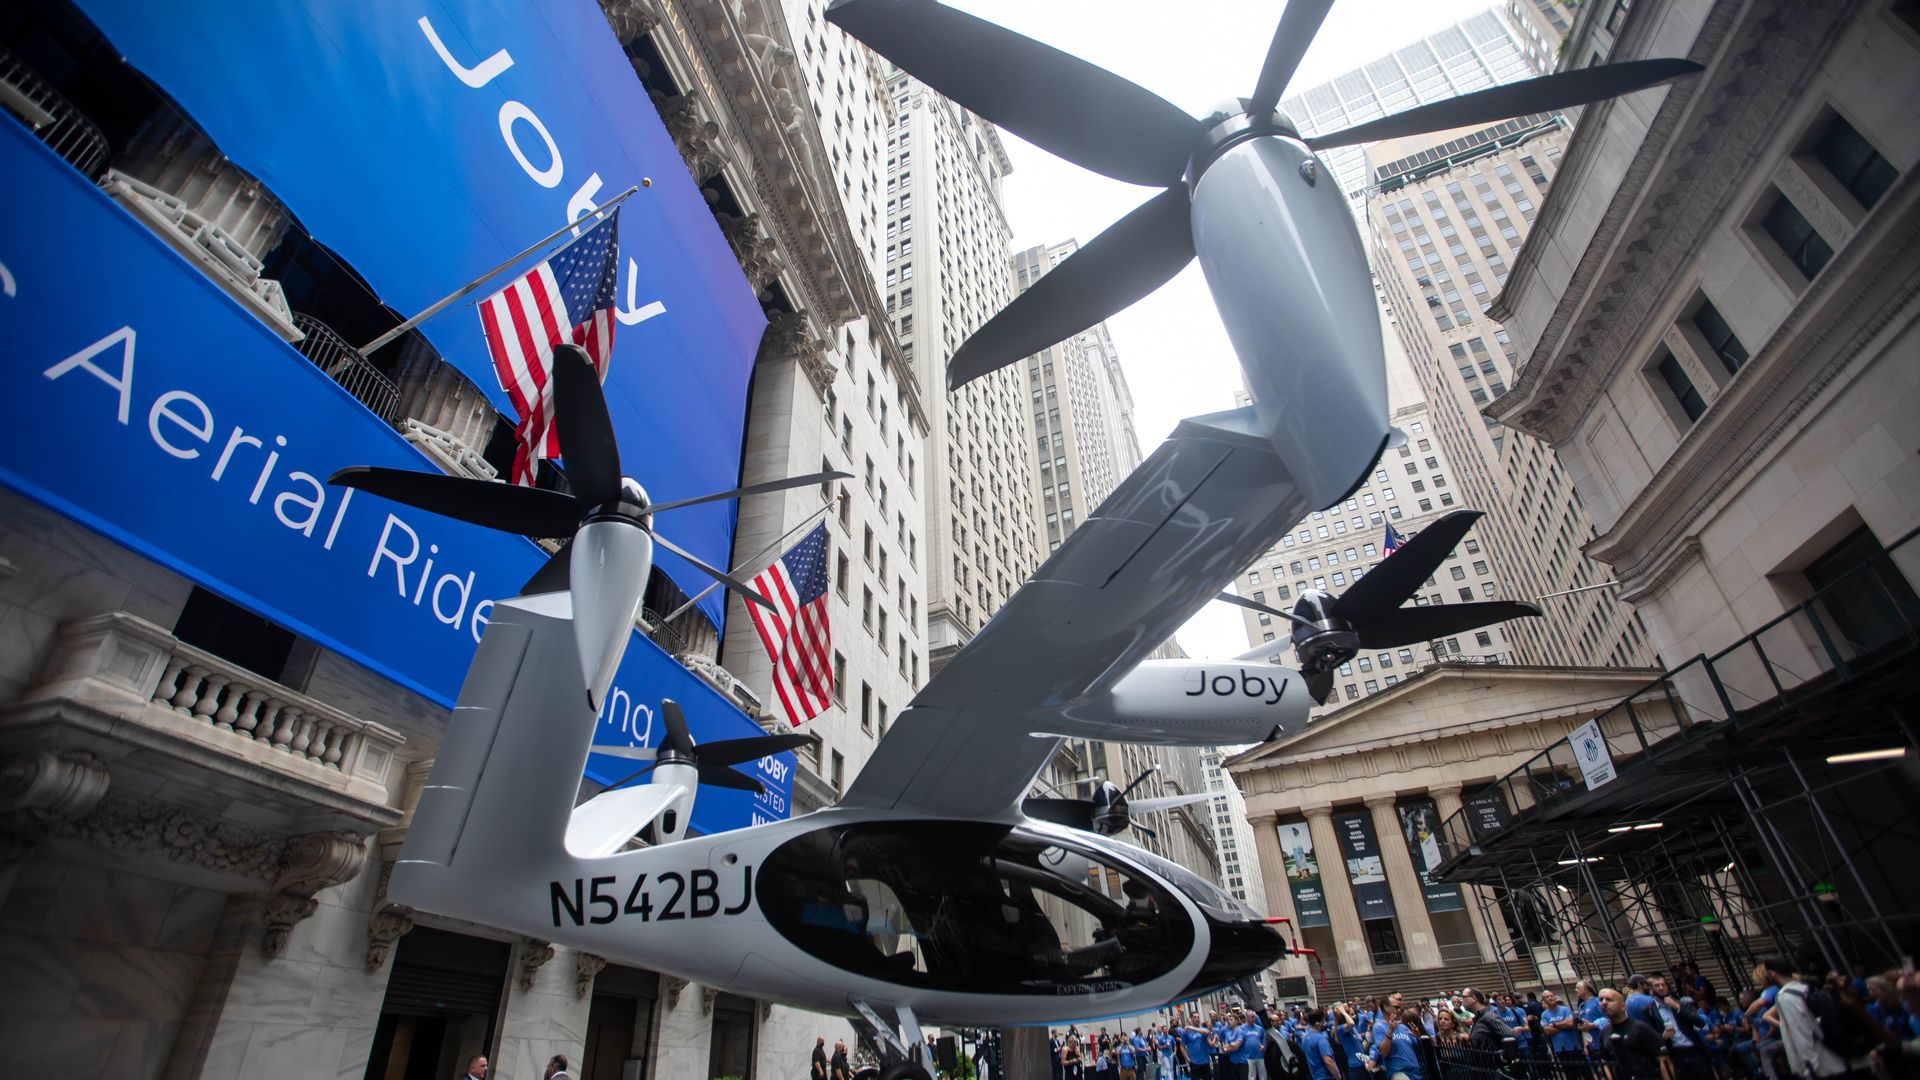 Joby Aviation airplane sits outside the New York Stock Exchange.